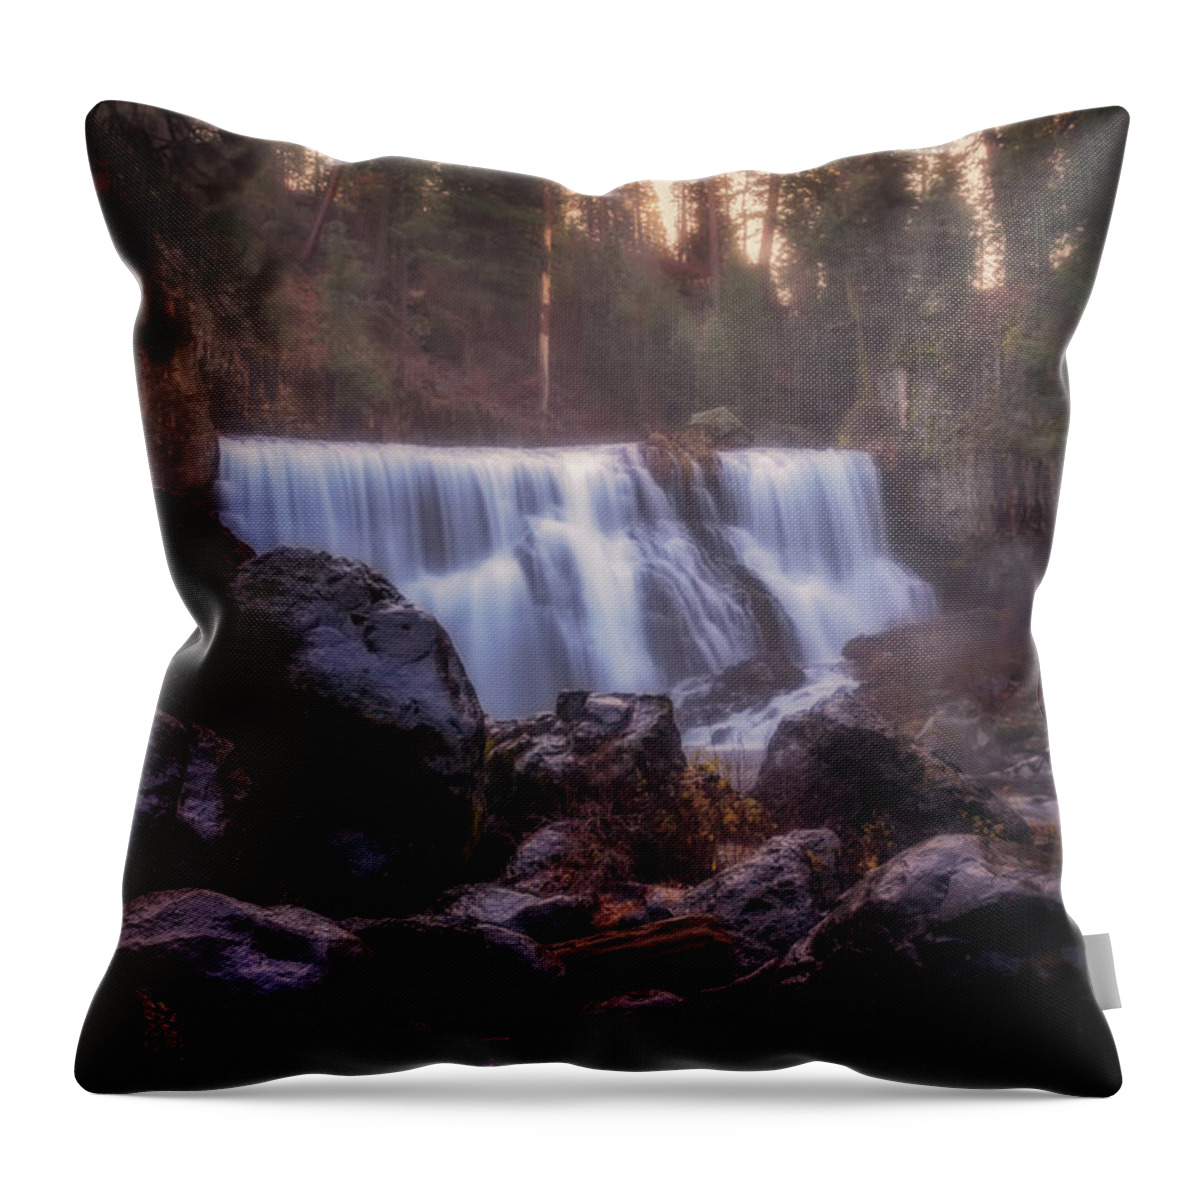 California Throw Pillow featuring the photograph Almost There by Marnie Patchett